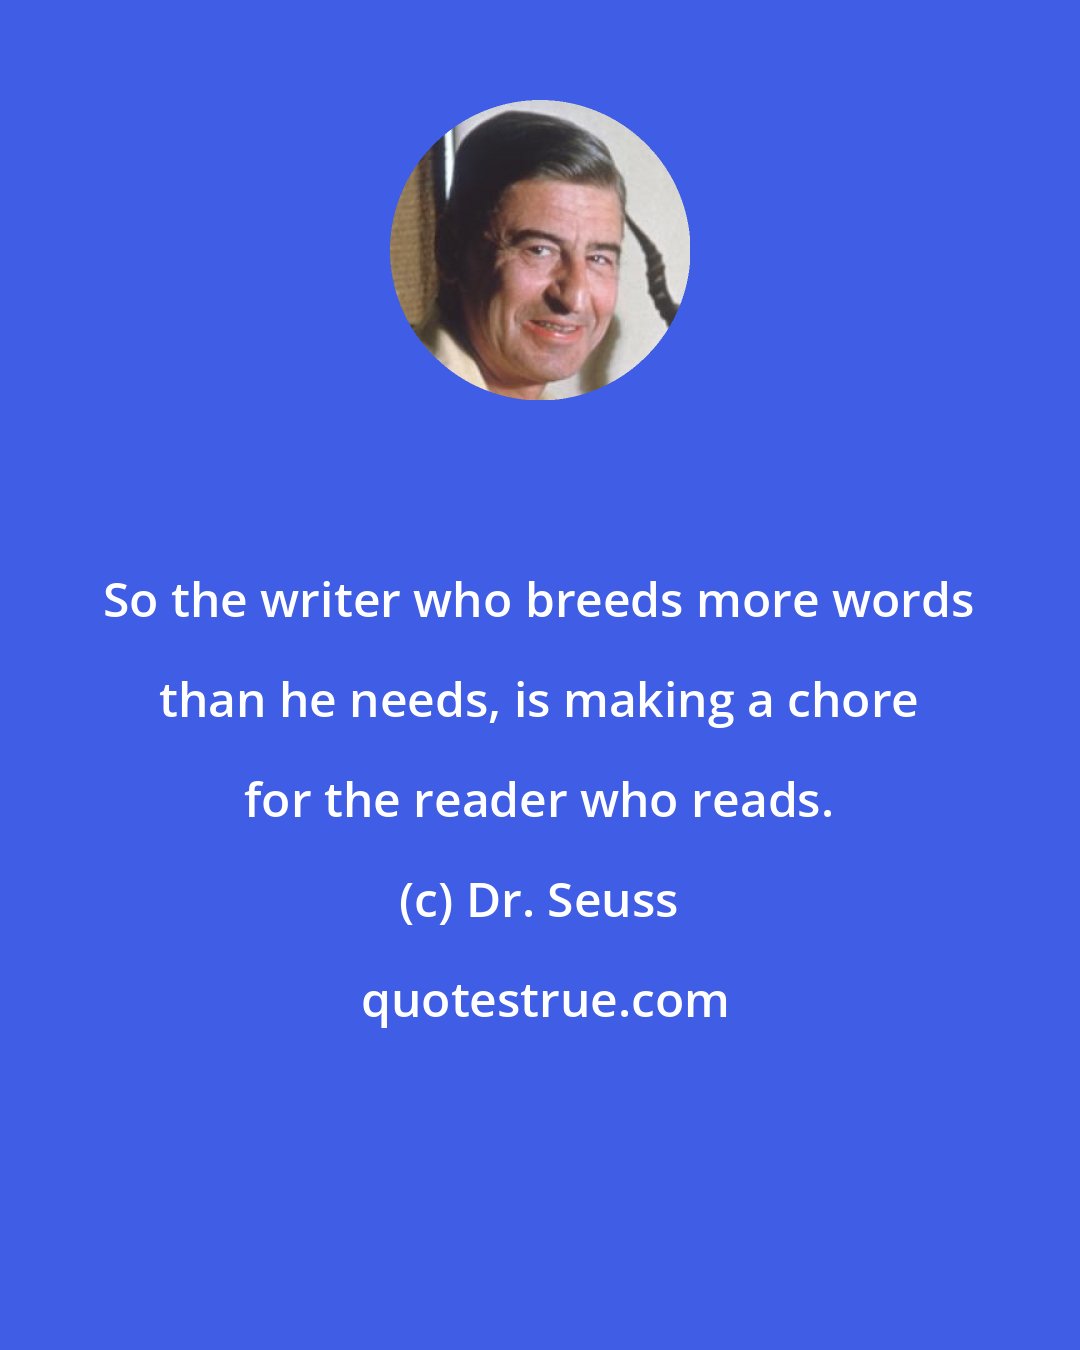 Dr. Seuss: So the writer who breeds more words than he needs, is making a chore for the reader who reads.